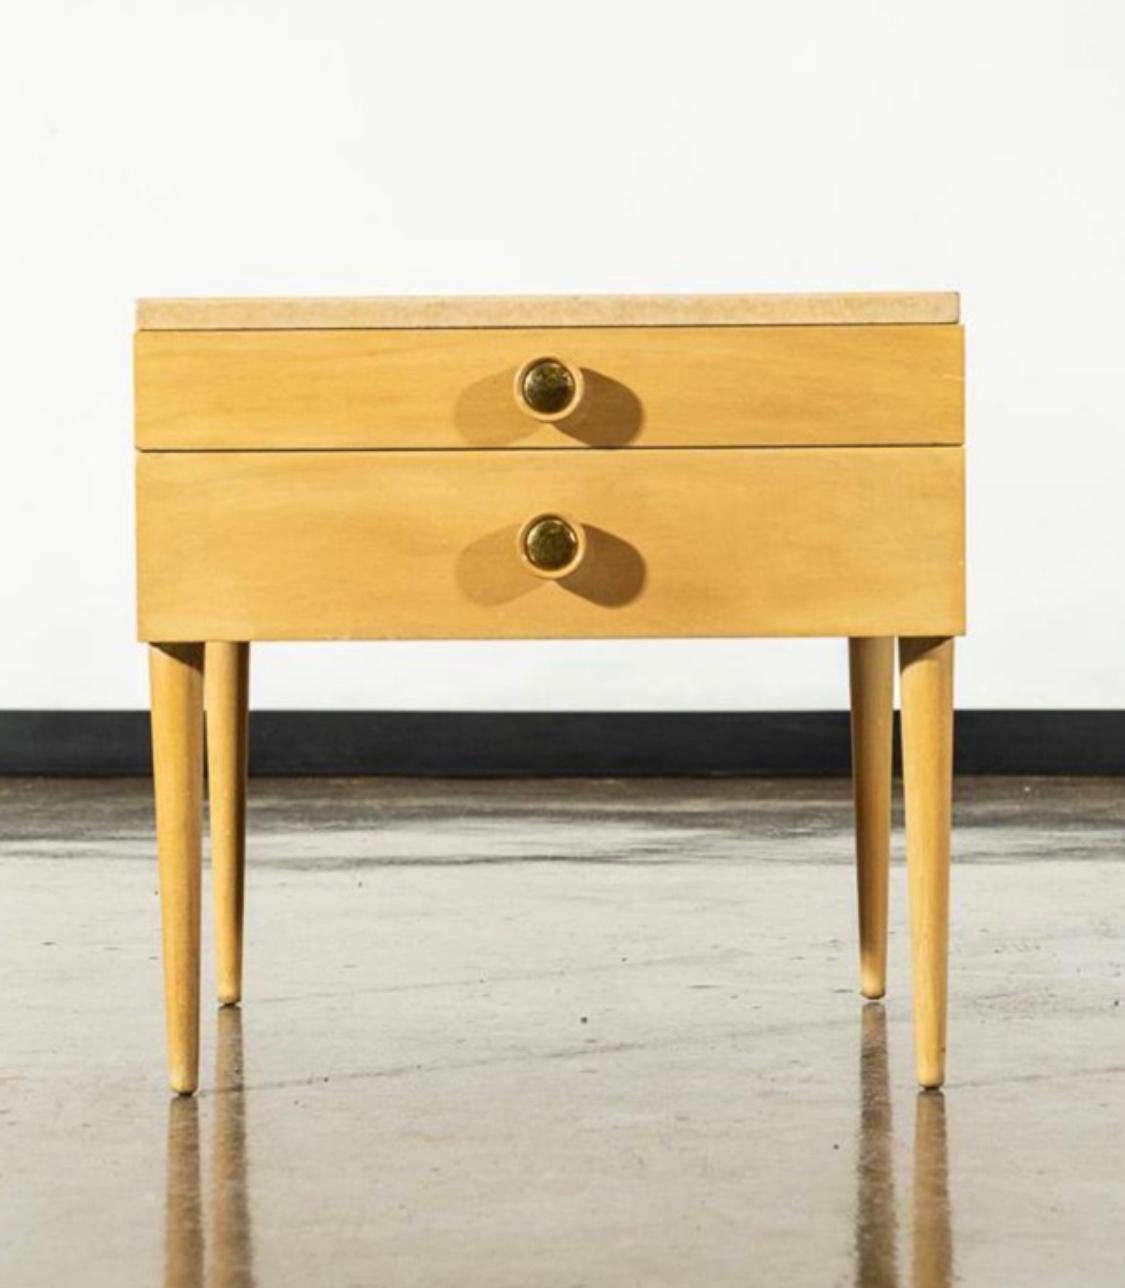 Lovey cork top and birch side table or nightstand designed by Paul Frankl for Johnson Furniture Company. Elegant and simple lines with handsome details. Gorgeous drawer pulls and unusual cork top.